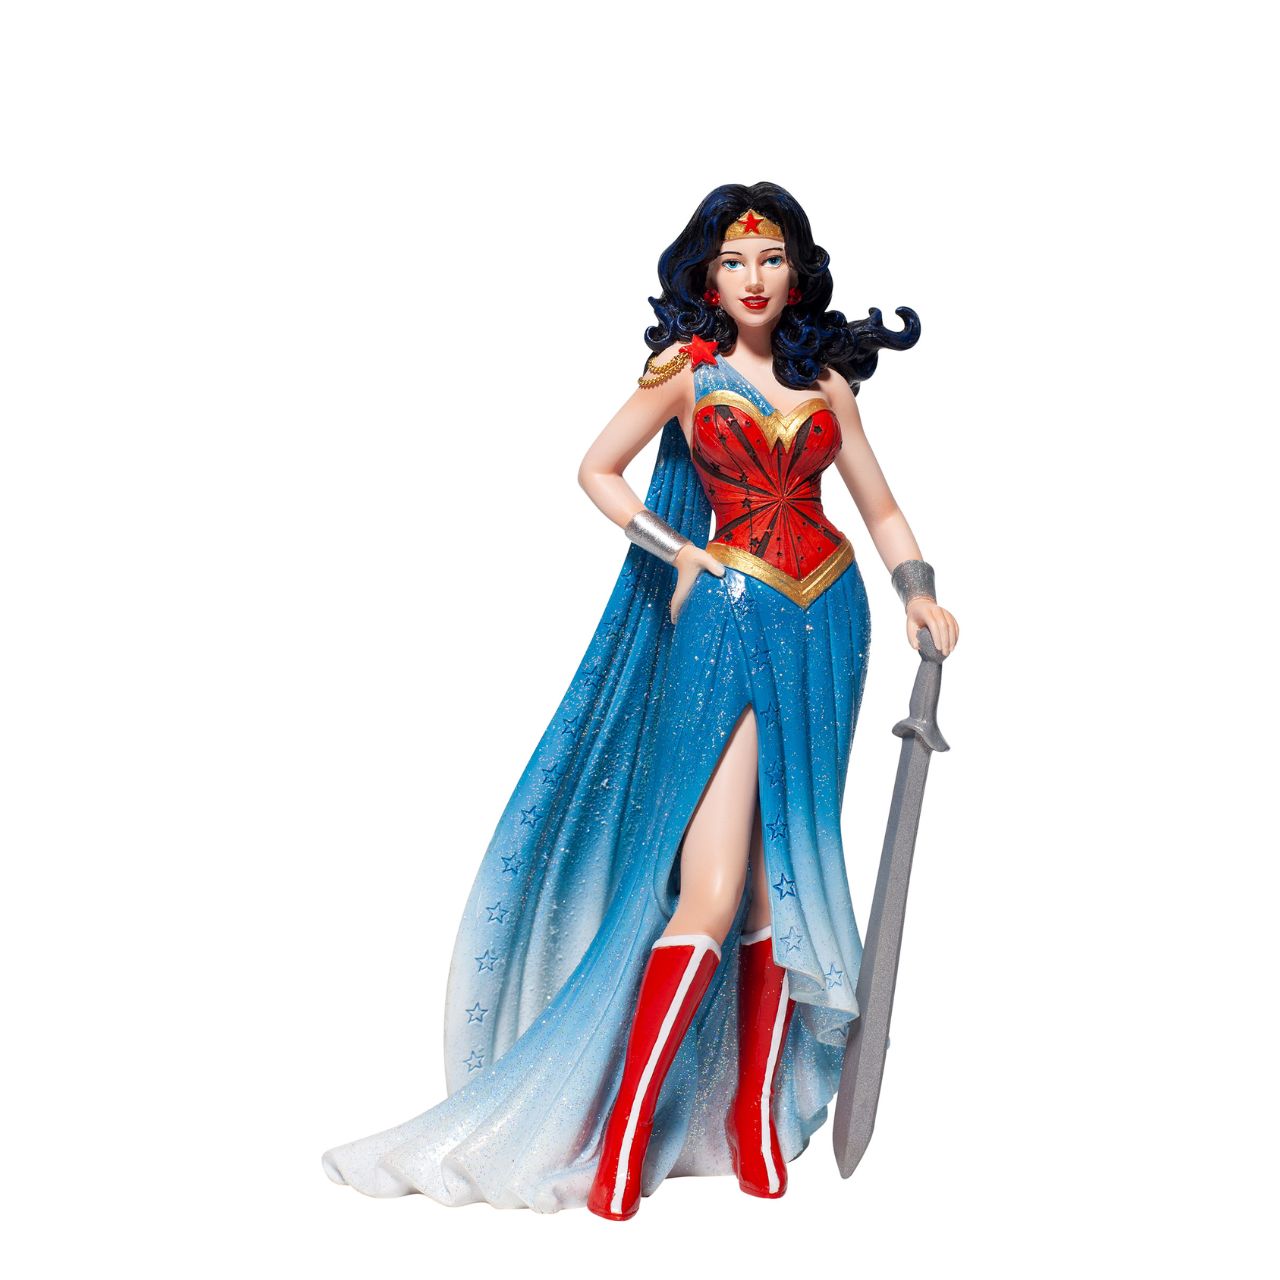 DC Comics Wonder Woman Couture de Force Figurine  Fierce meets fabulous in this meticulously reimagined hand-crafted figure inspired by DC Comics most iconic heroines and villains. Shimmering with glitter and metallic gold accents on her flowing cape and stylish skirt, Wonder Woman stands ready to conquer the world.